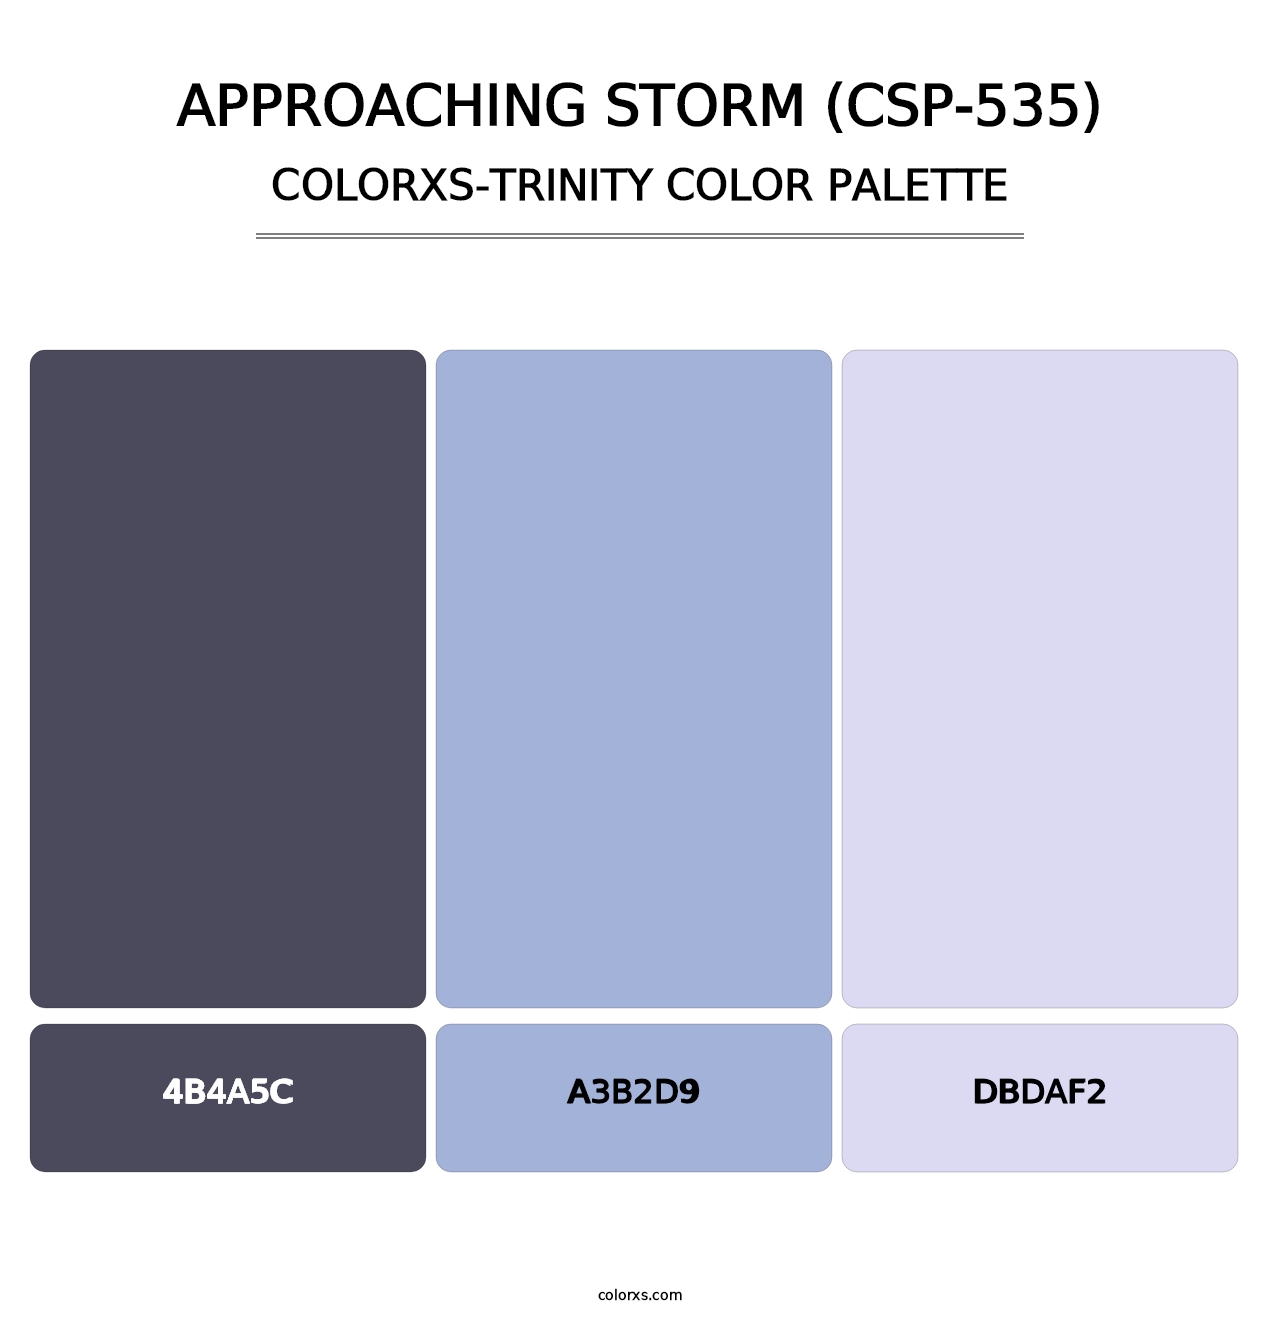 Approaching Storm (CSP-535) - Colorxs Trinity Palette